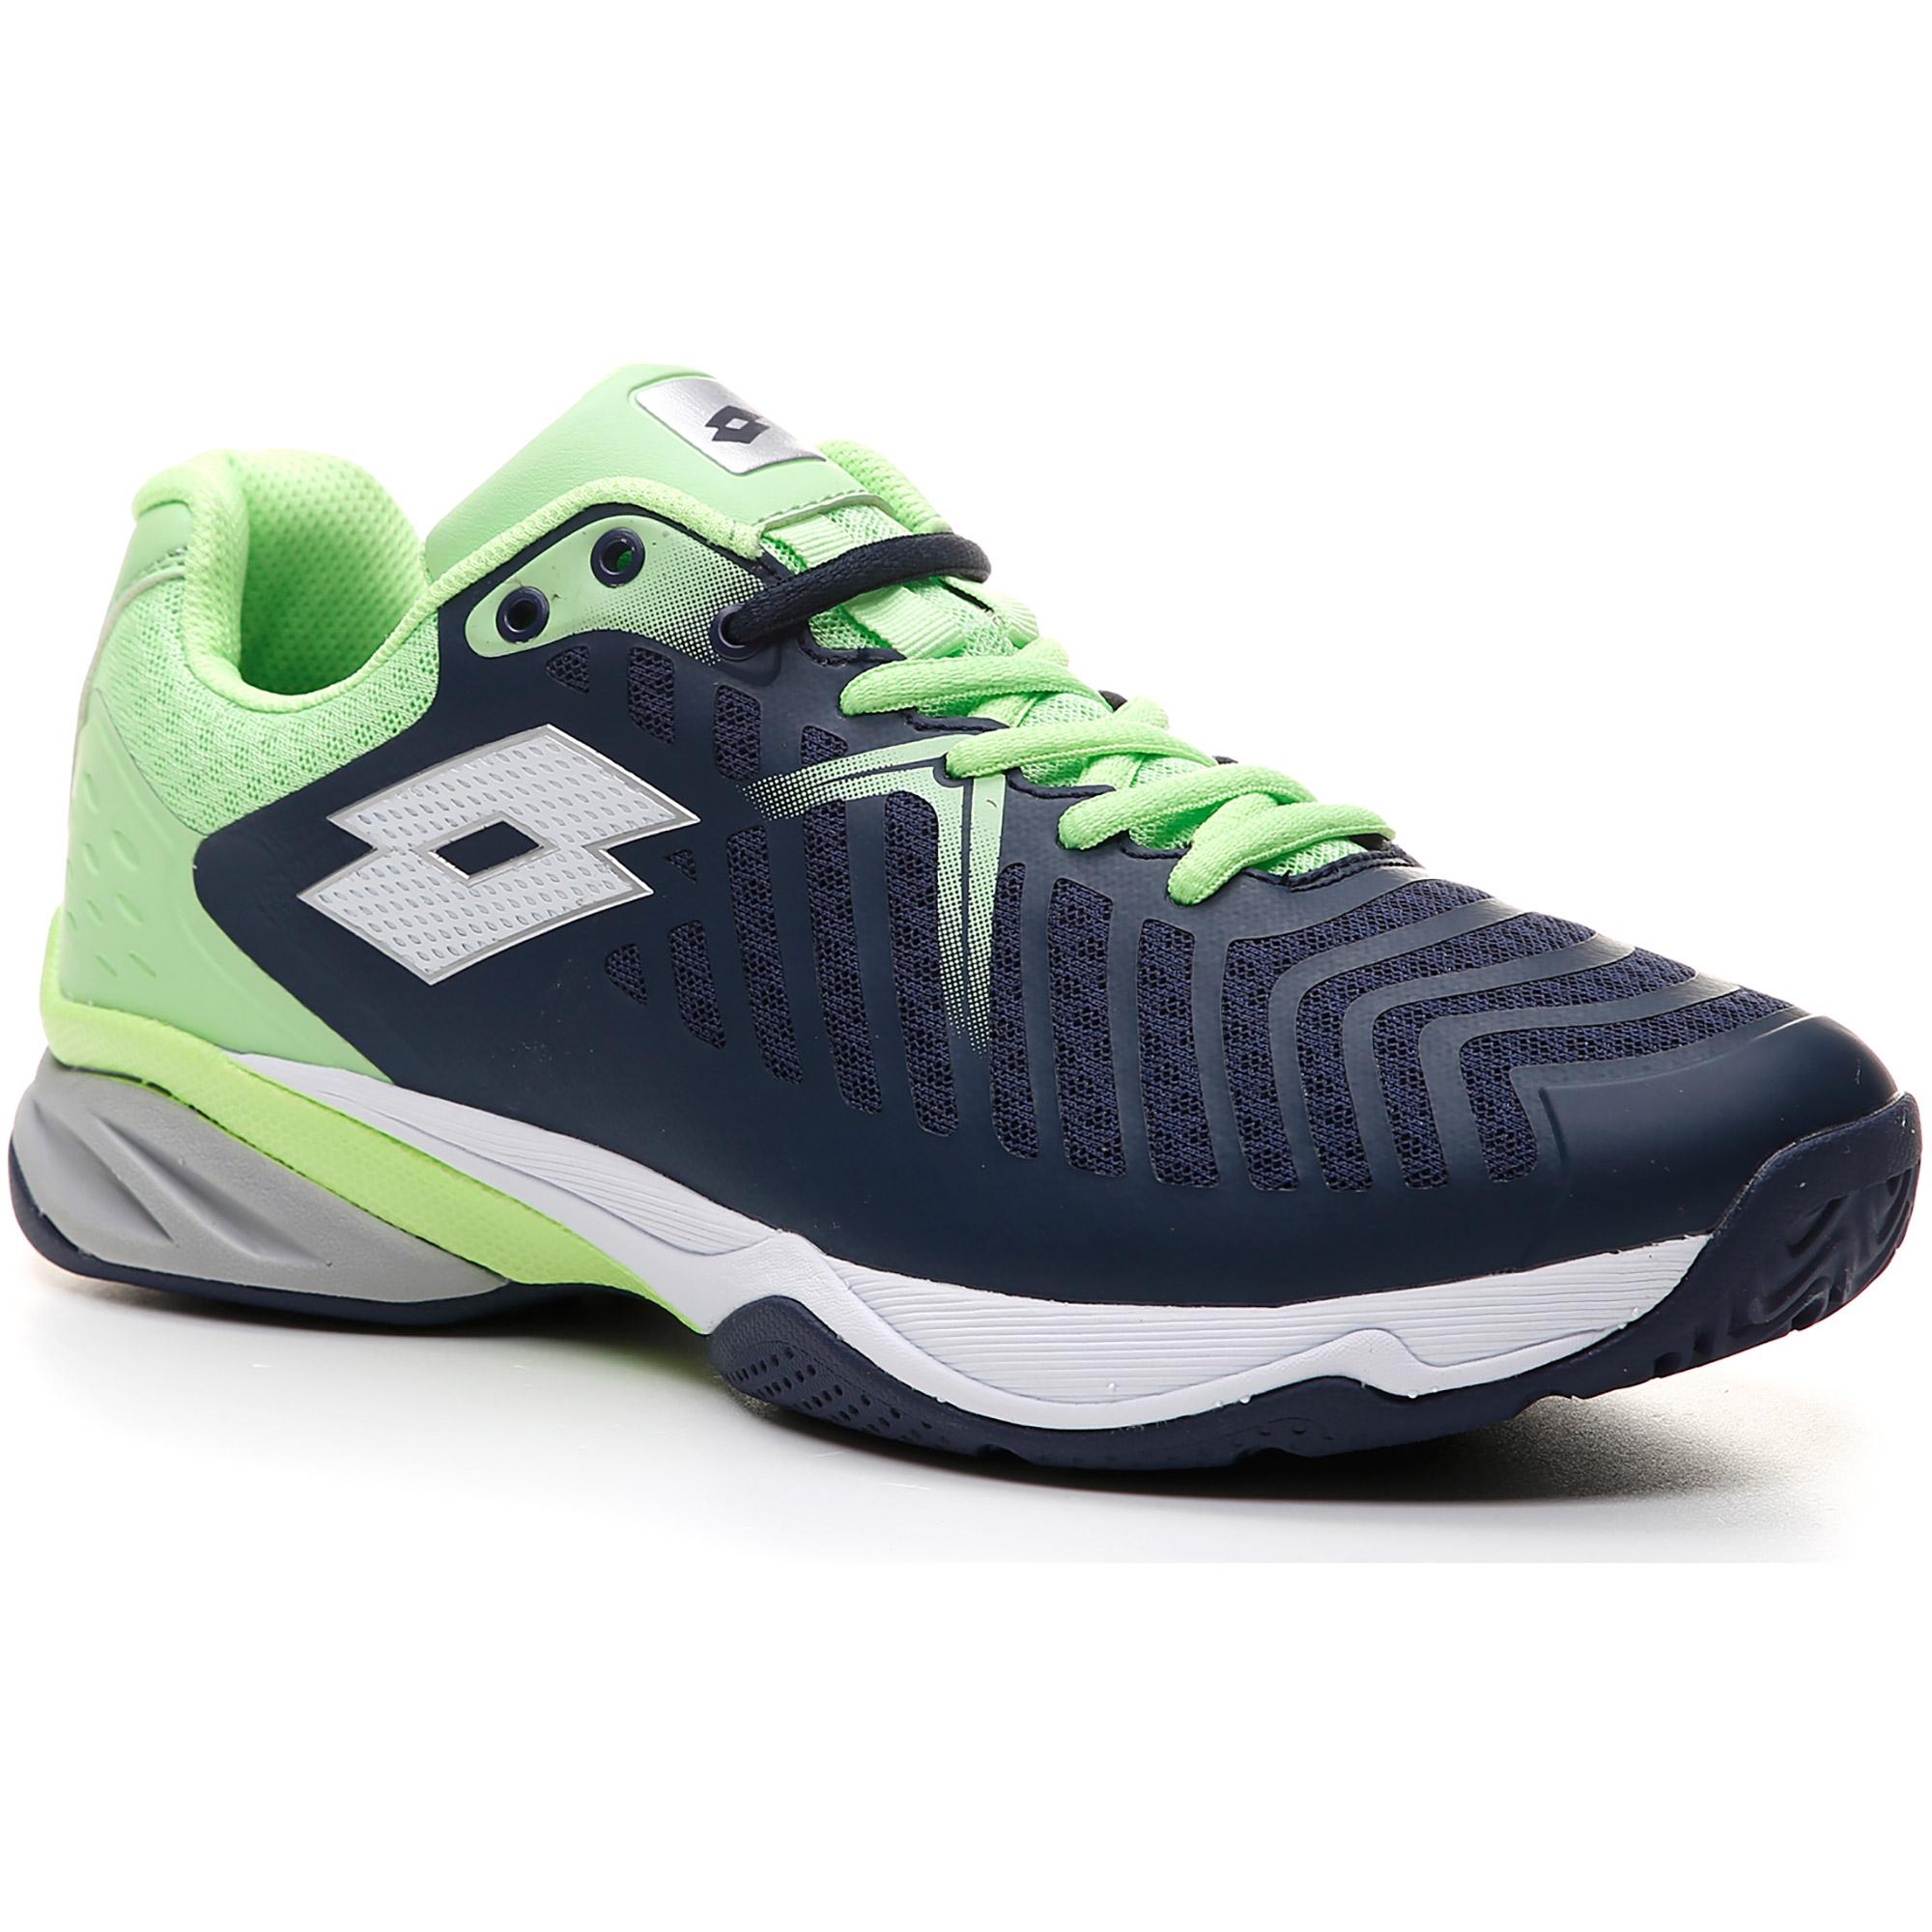 Lotto Mens Space 400 Tennis Shoes Navy Blue/All White